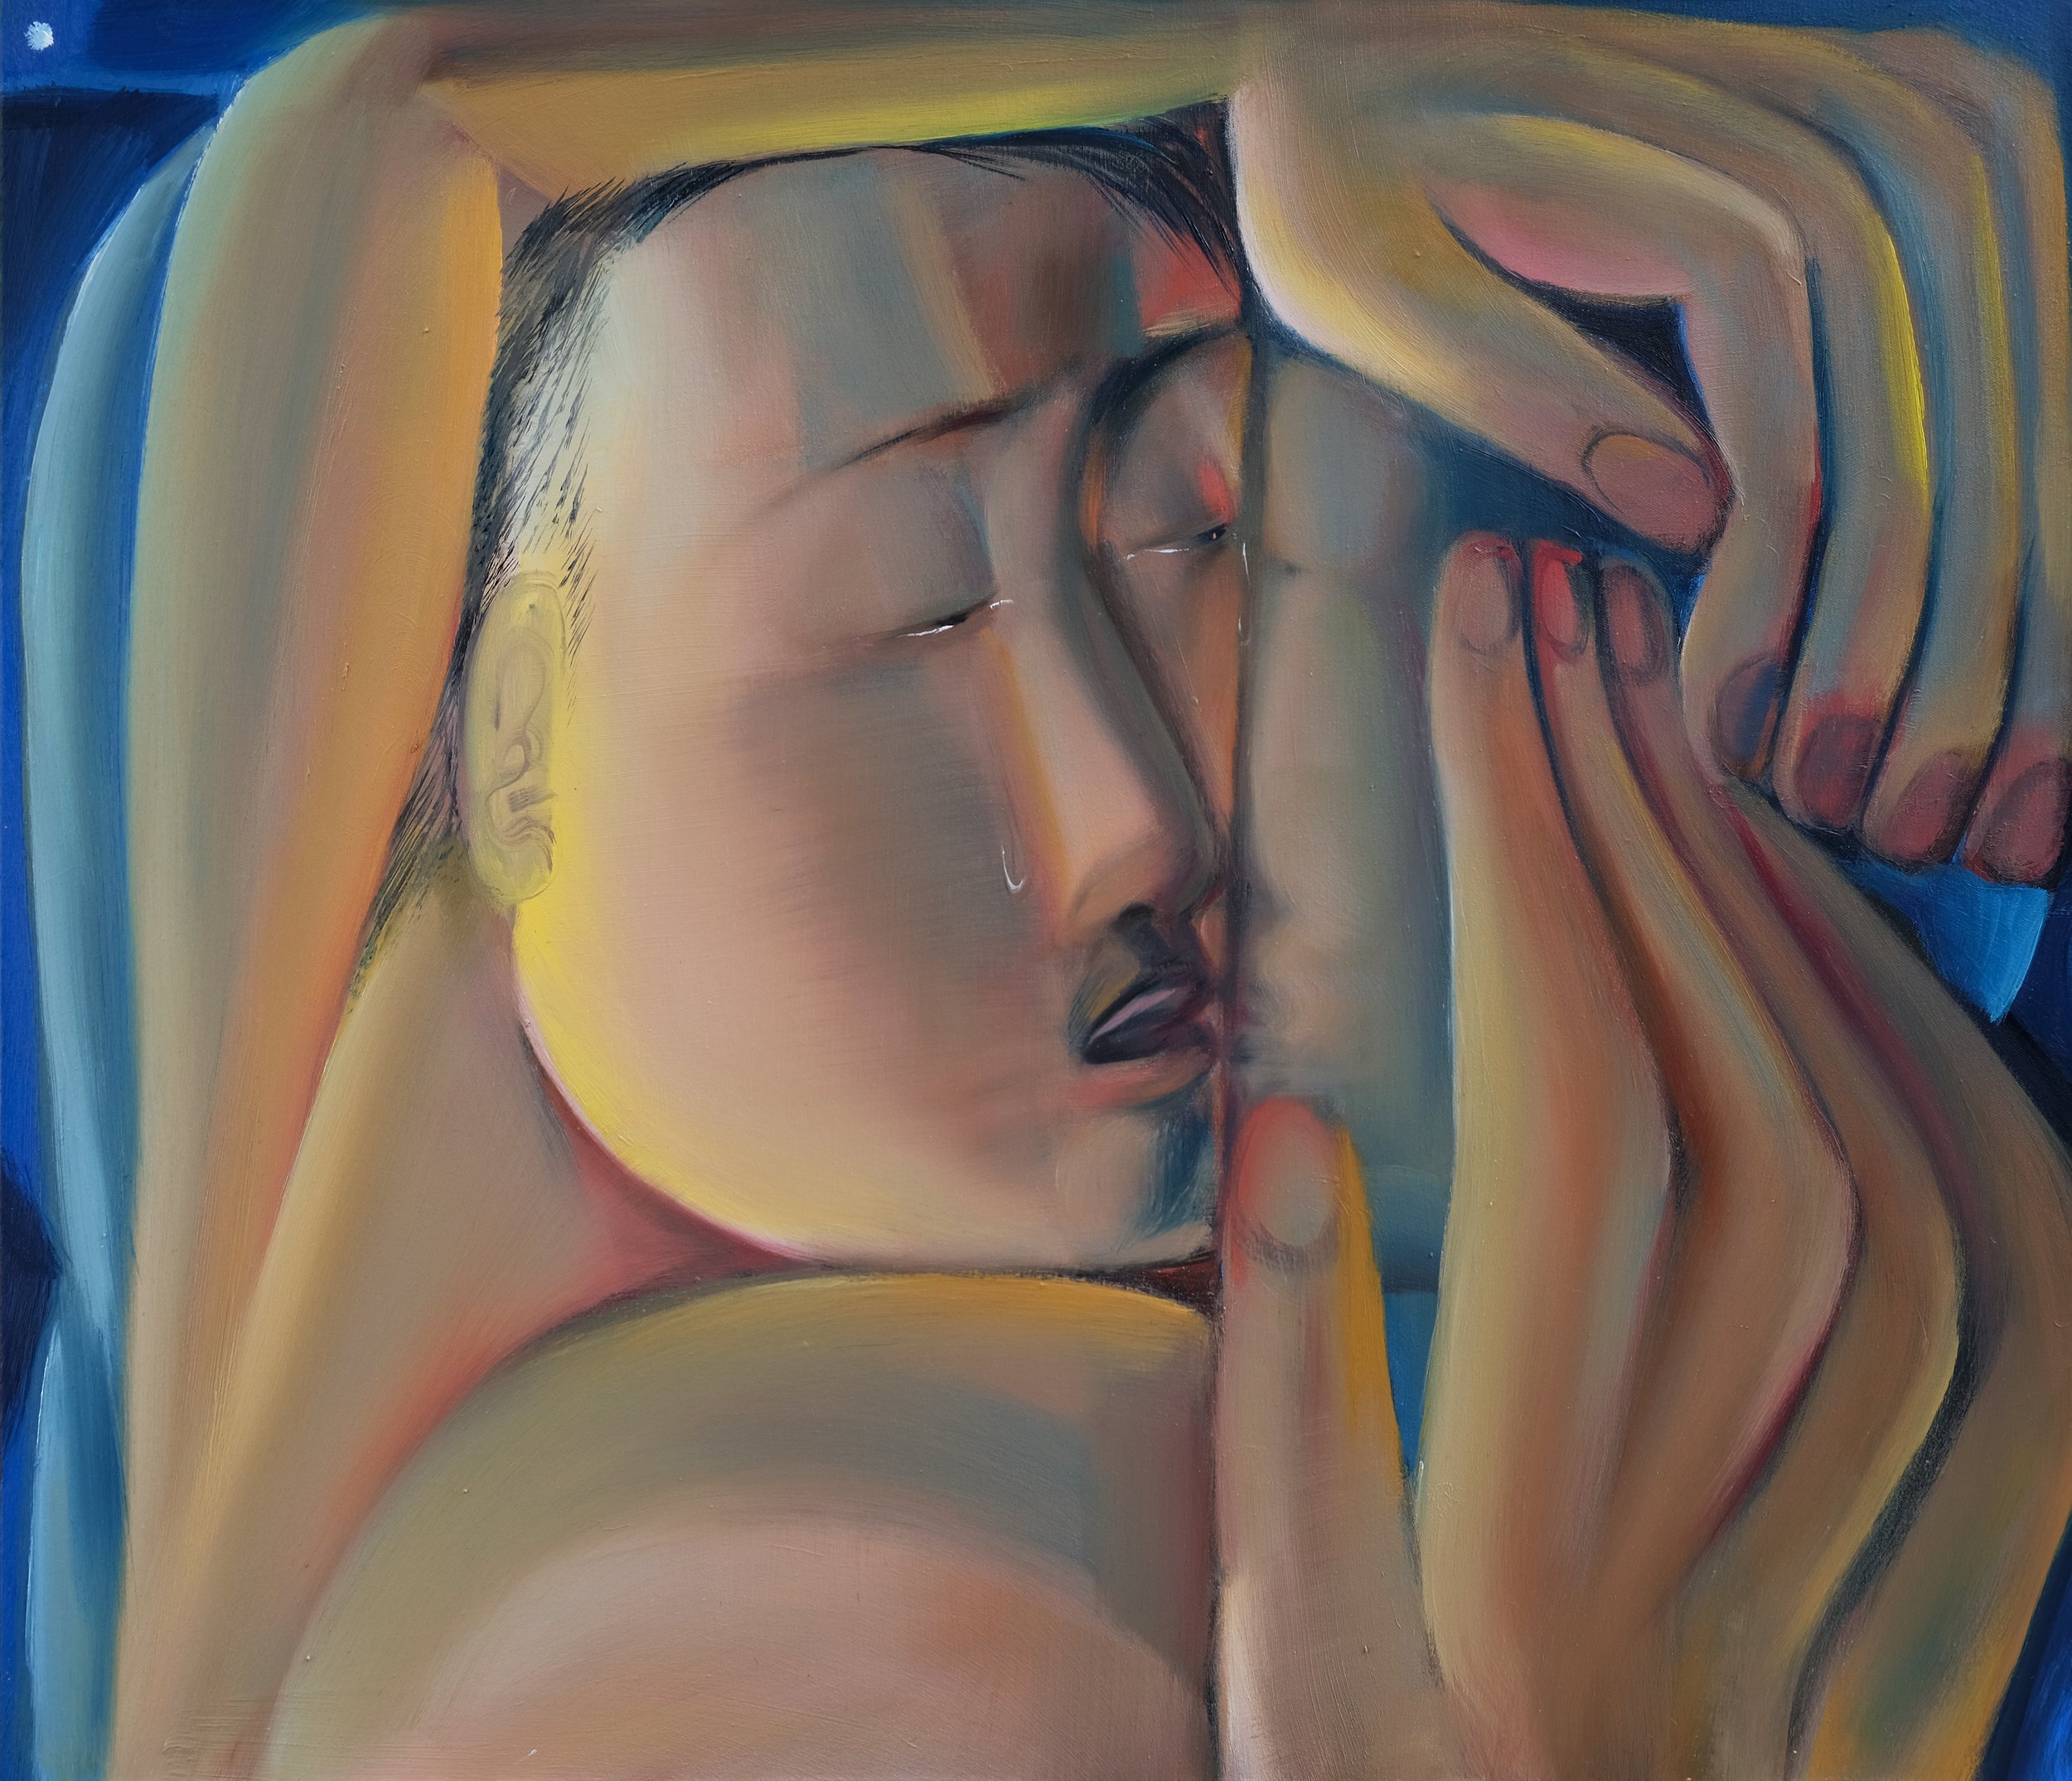   Heart of glass  (2023) oil on canvas, 60 x 70cm 